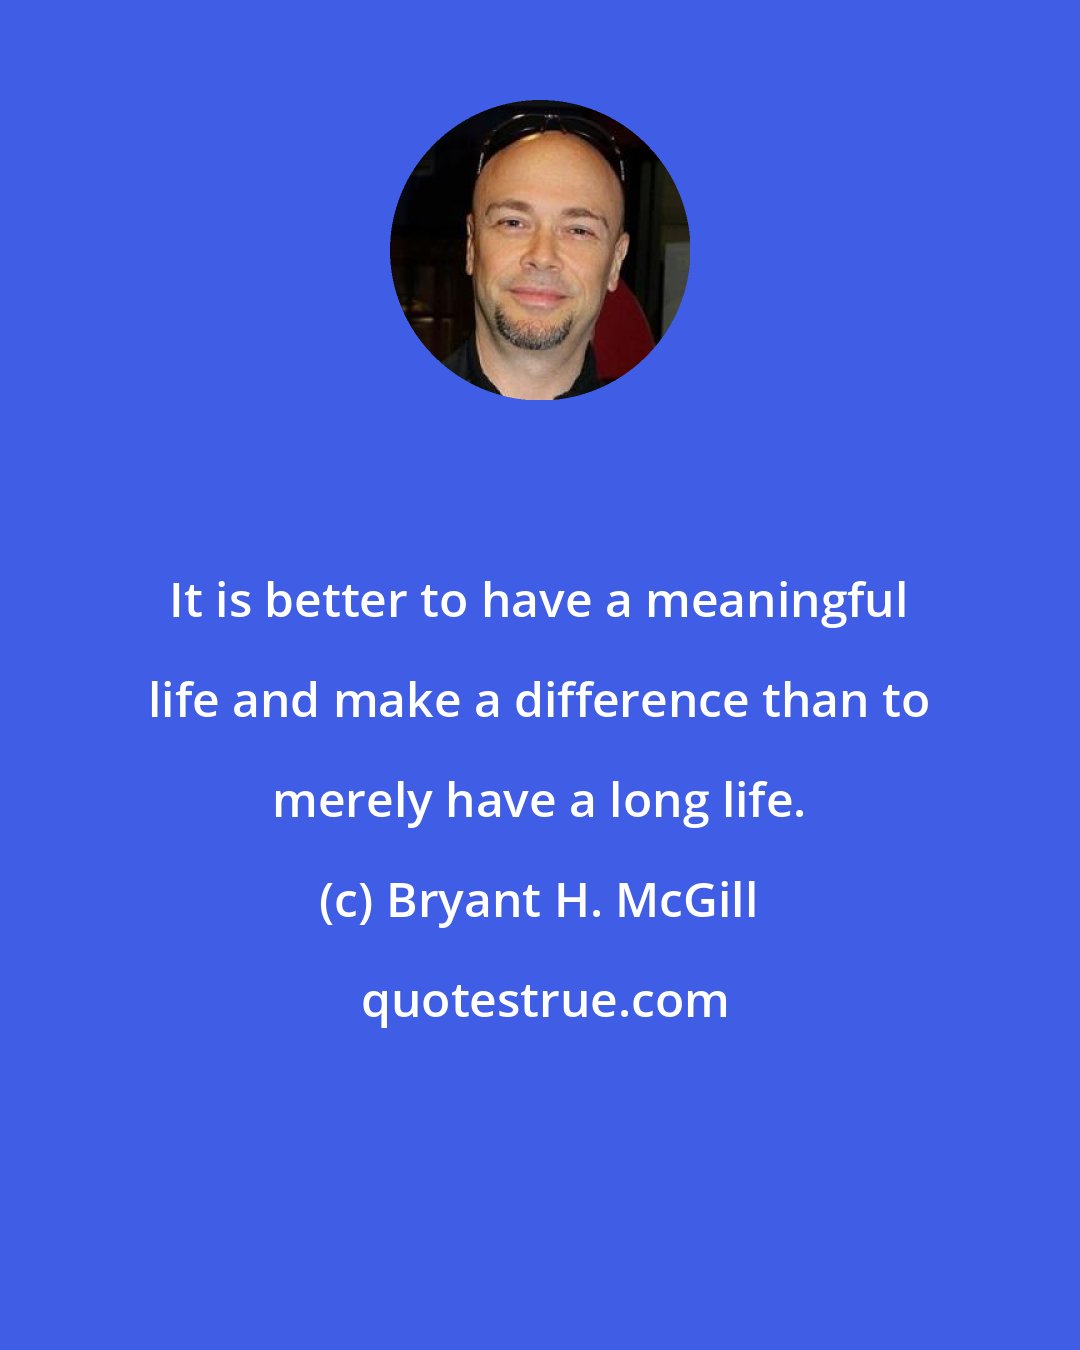 Bryant H. McGill: It is better to have a meaningful life and make a difference than to merely have a long life.